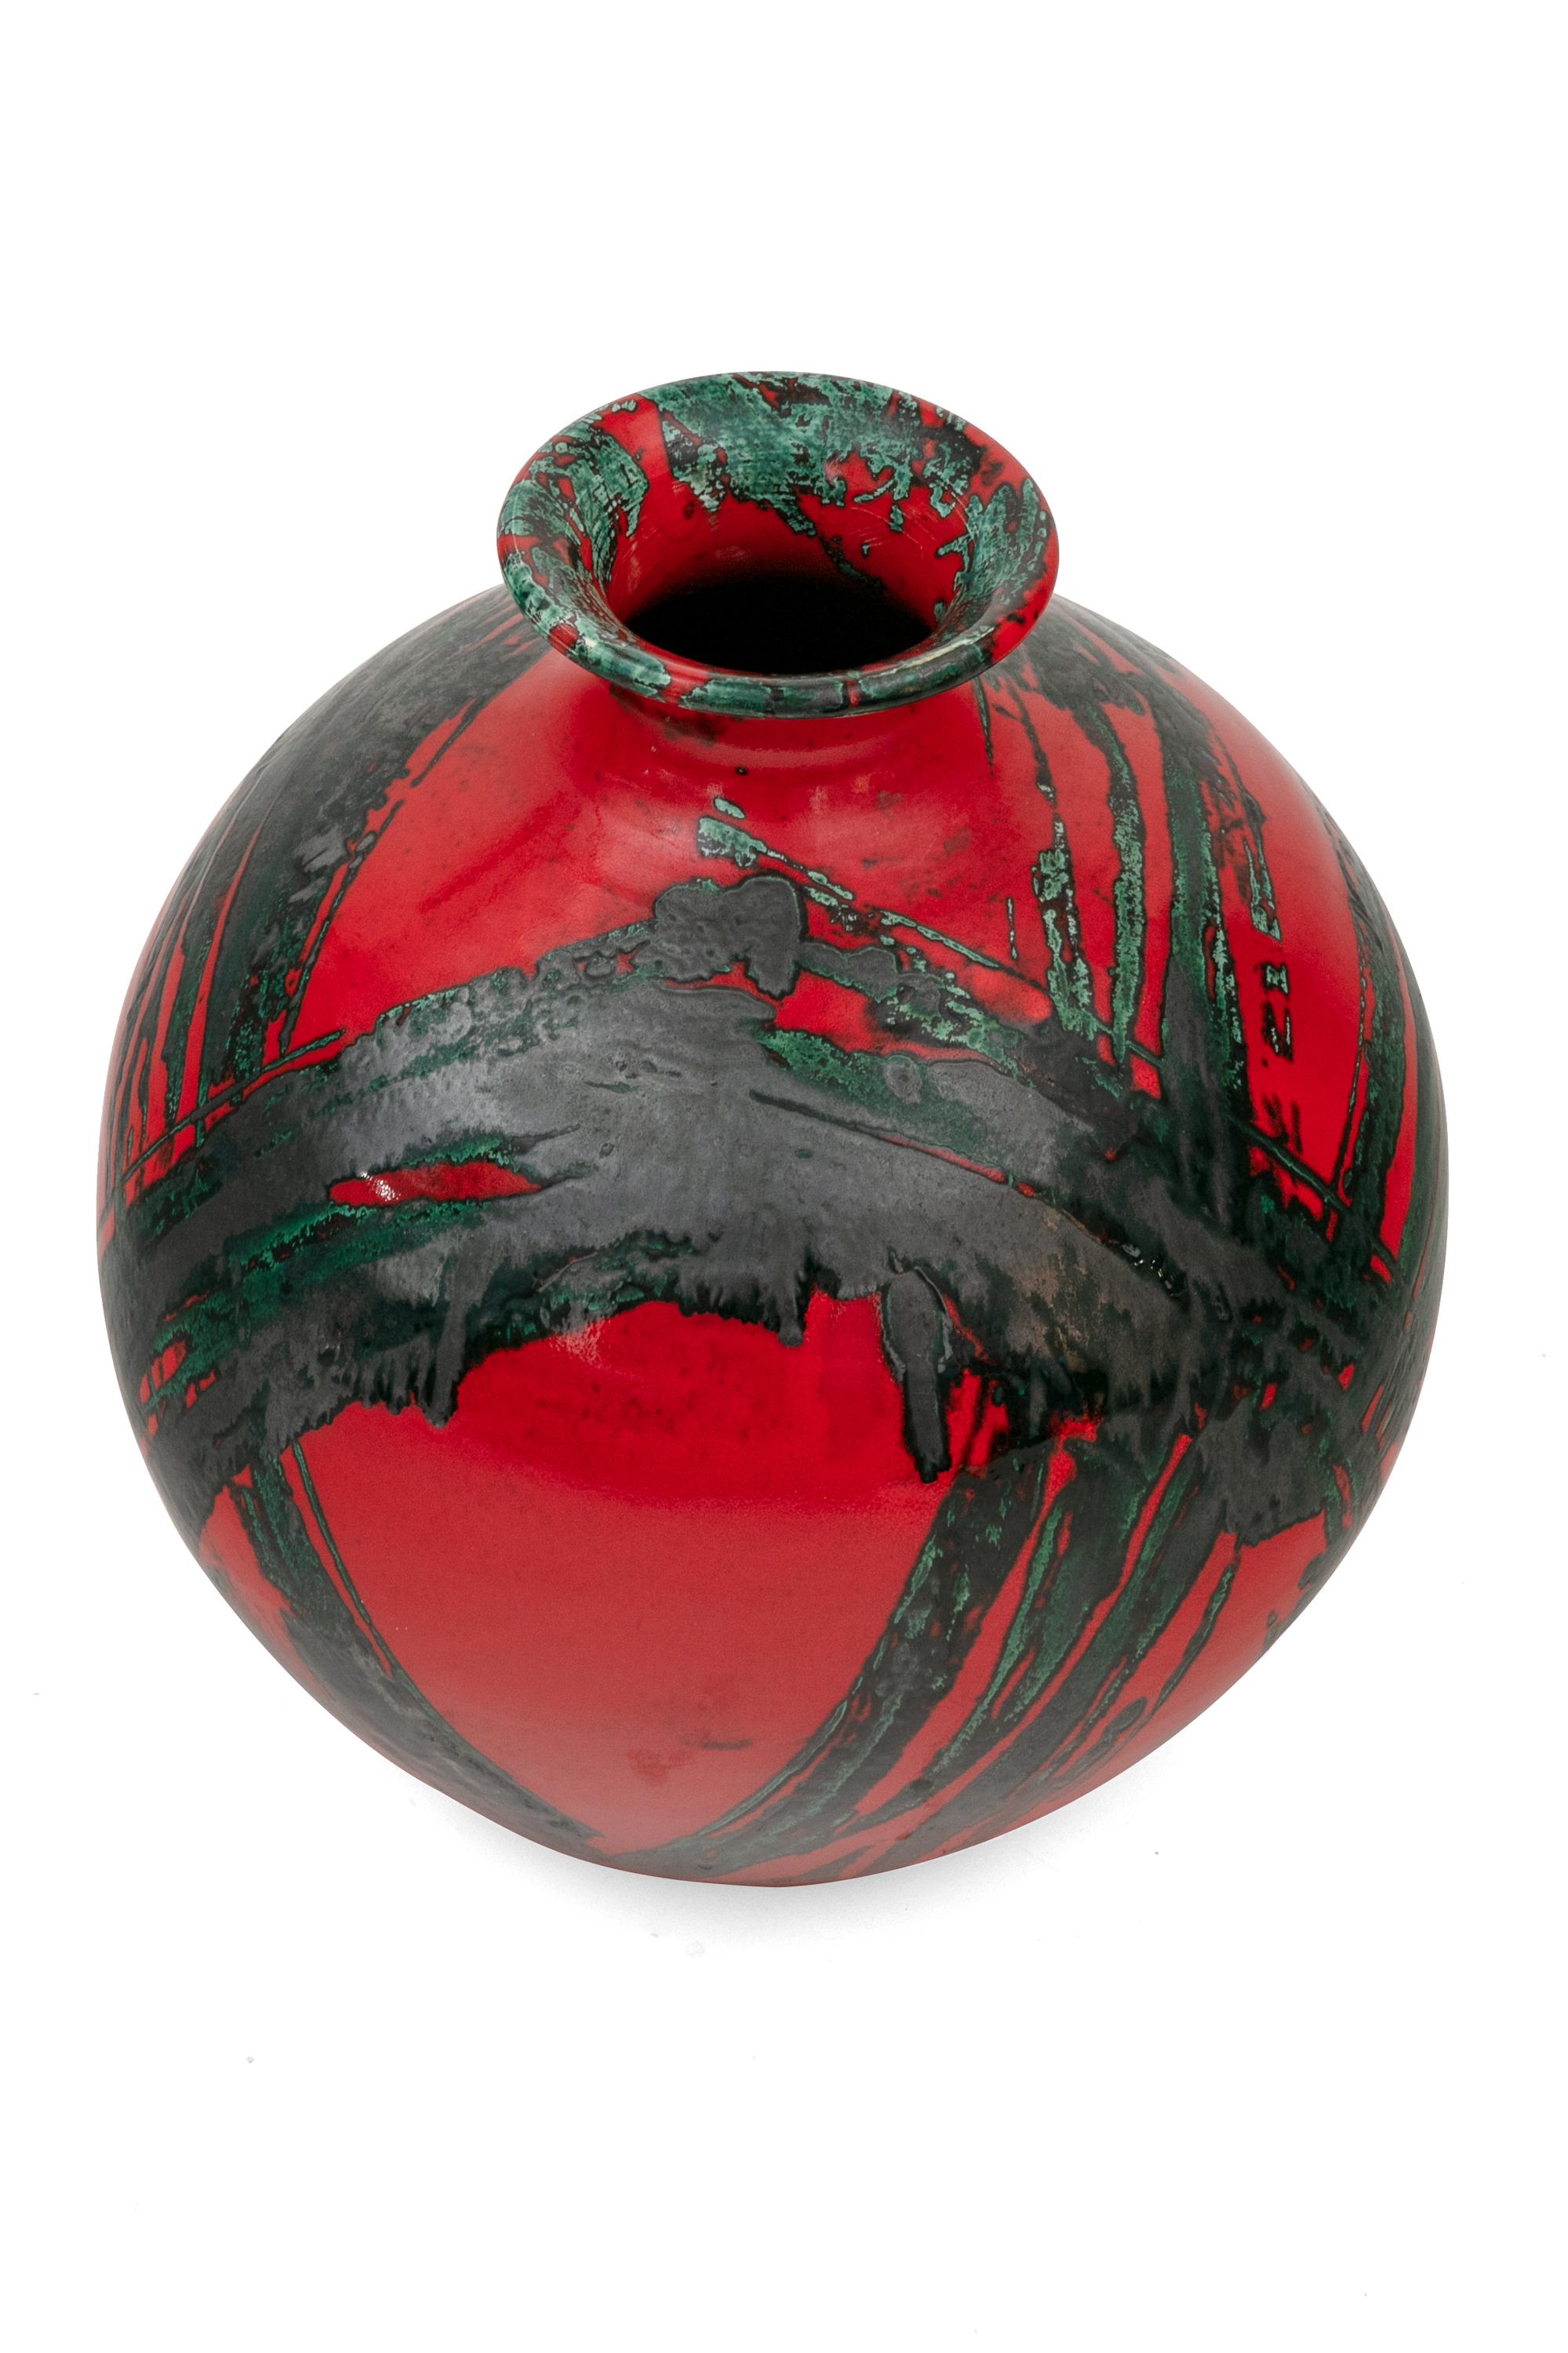 A striking piece of Italian art pottery with a vibrant decoration.